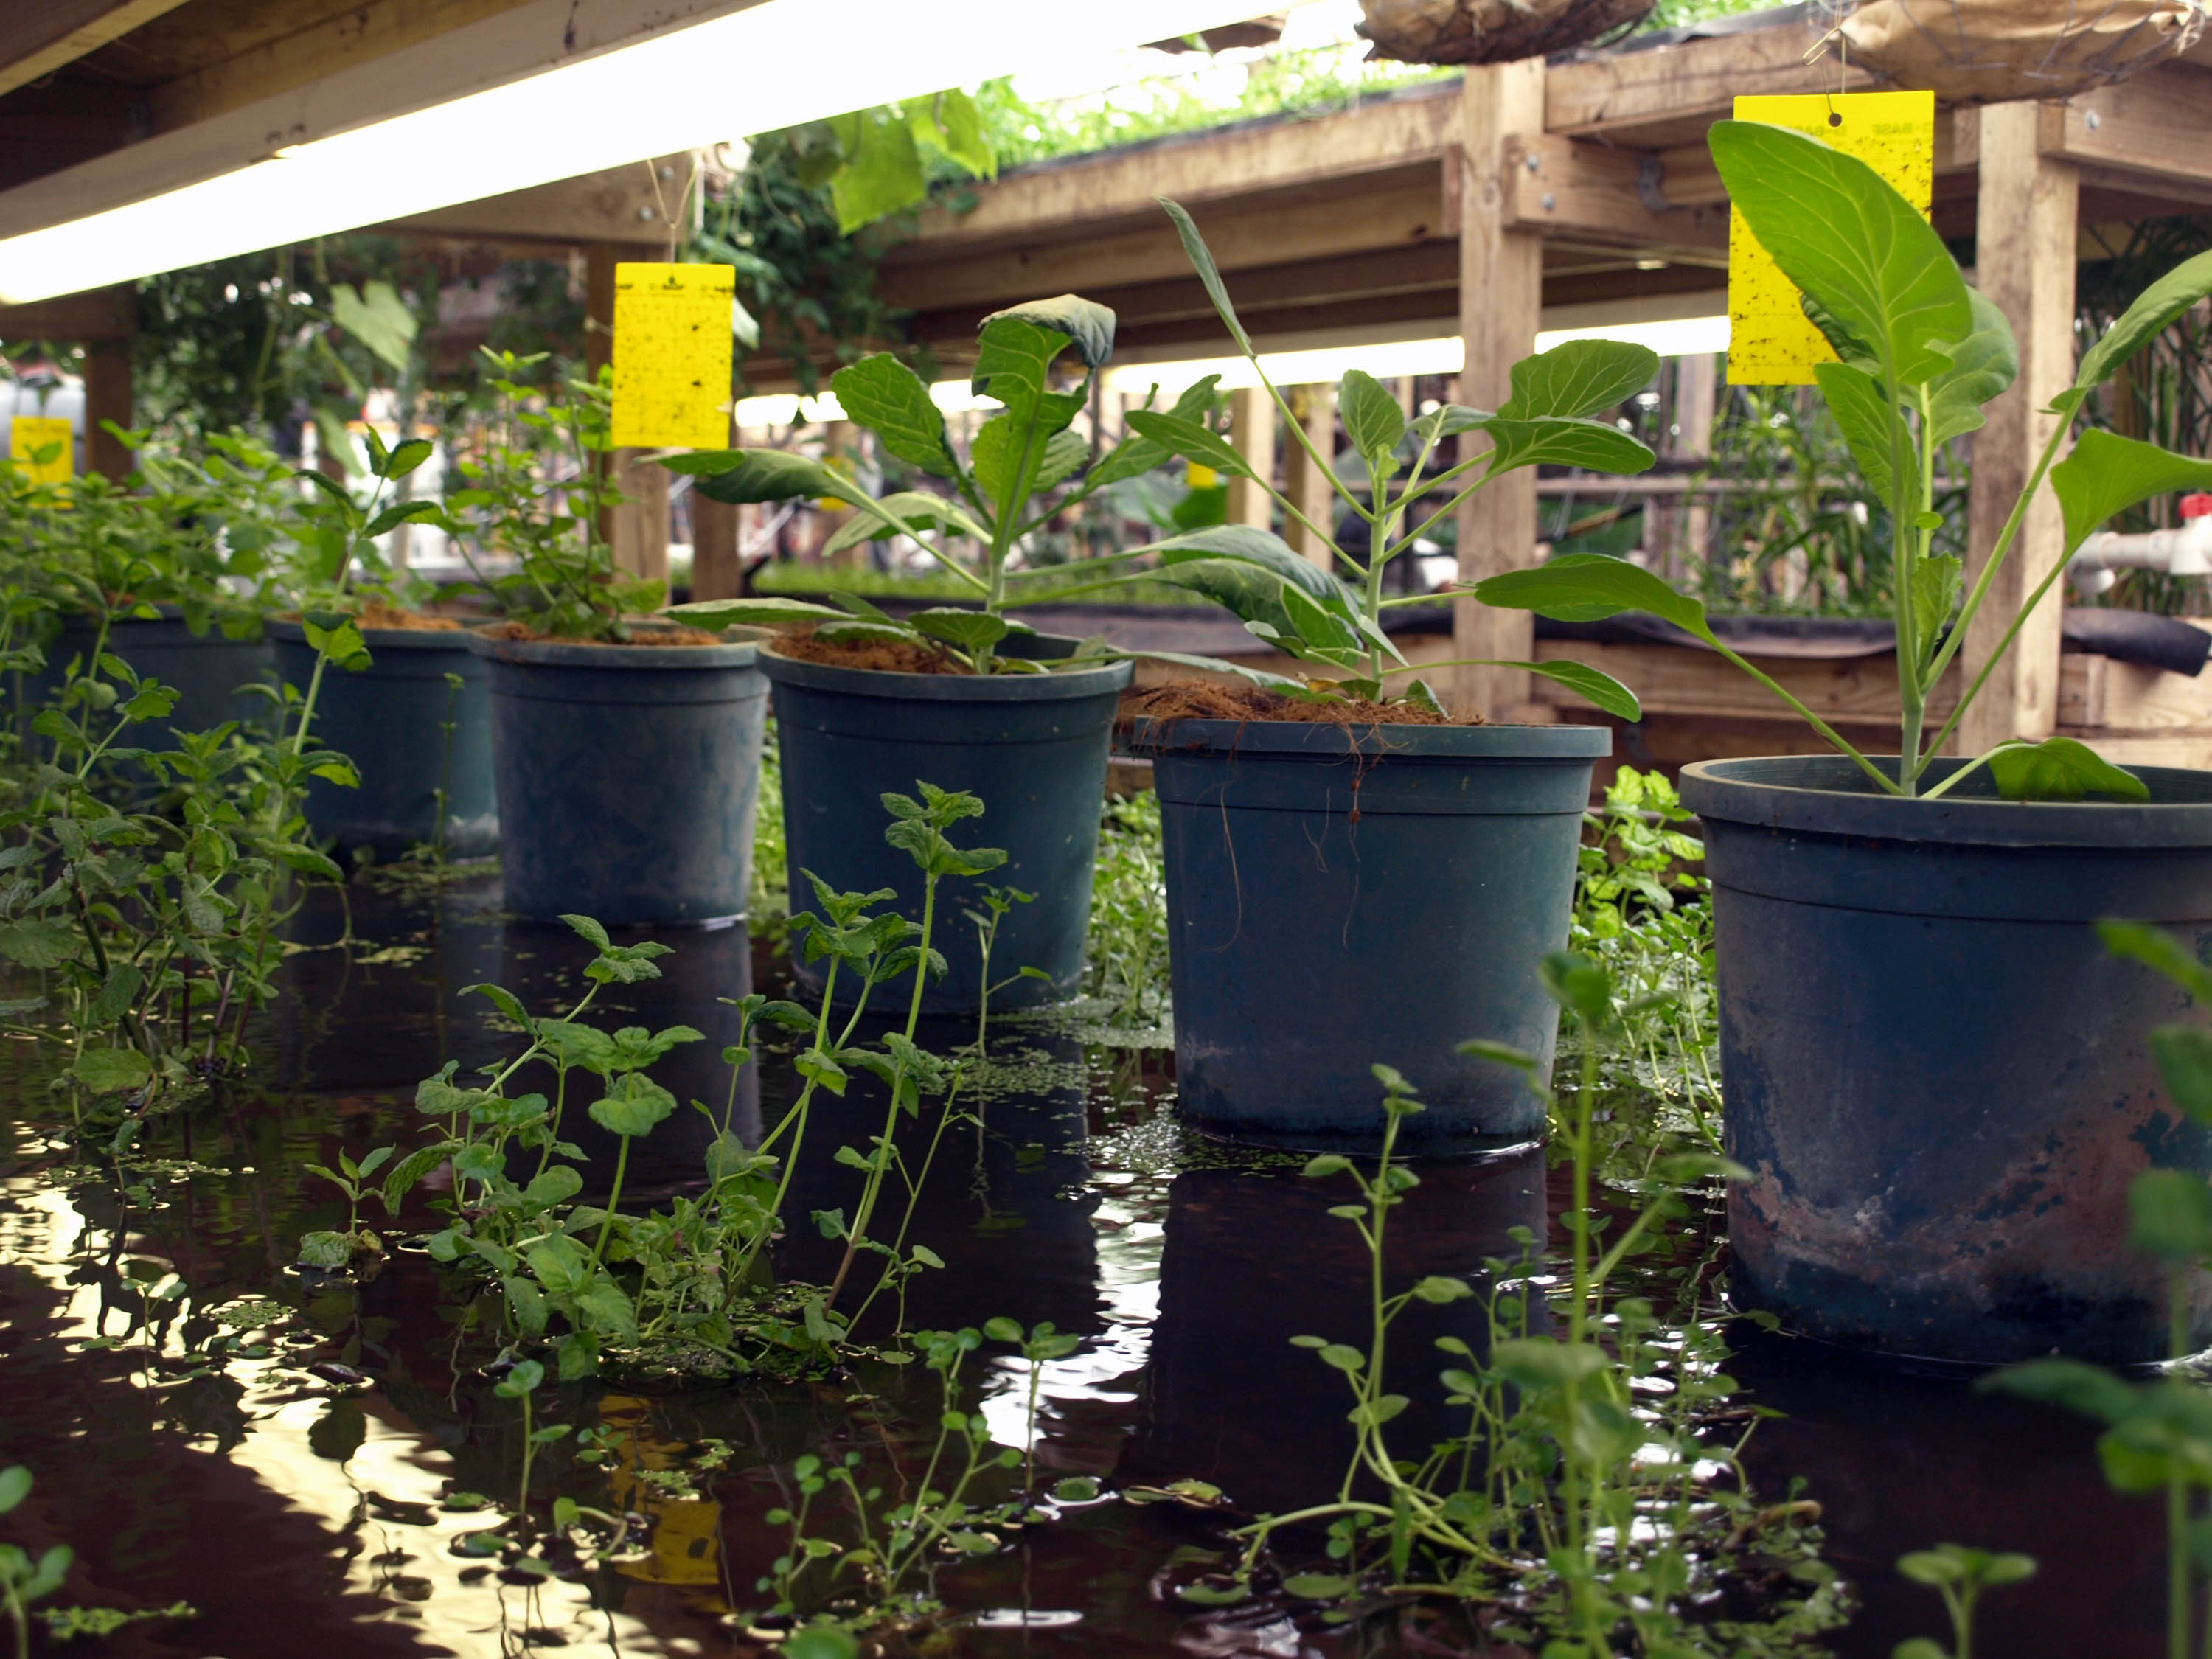 Rows of plants line the greenhouse where Growing Power's aquaponics system works to fertilize them.